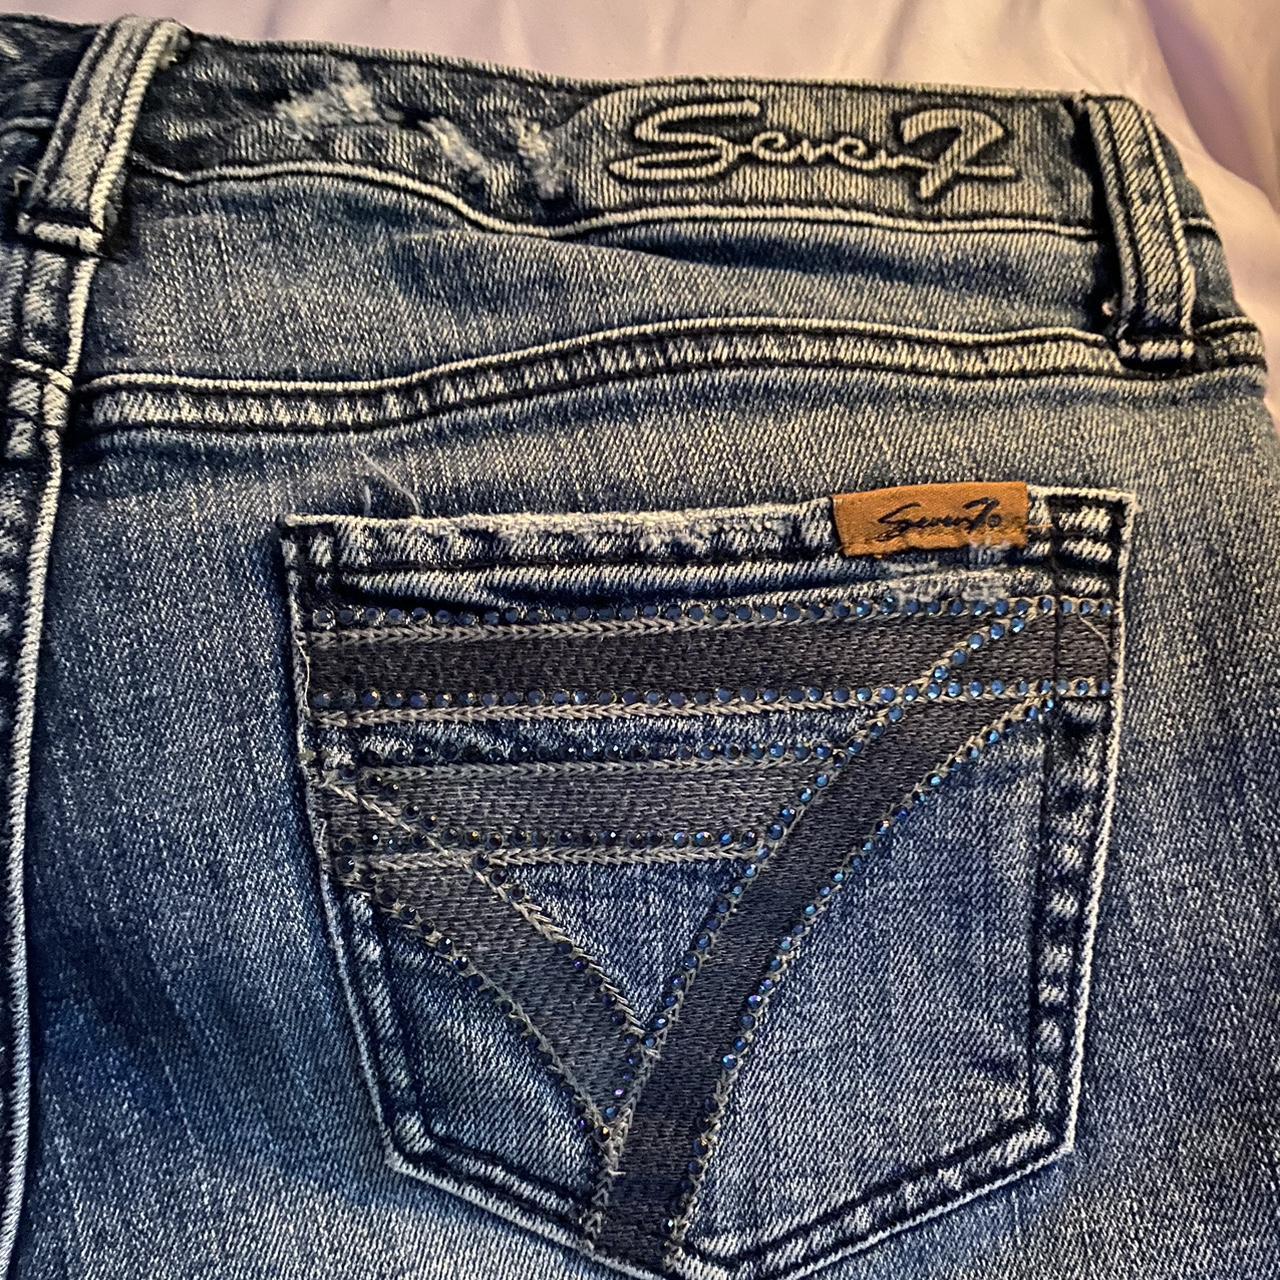 Seven7 jeans with bedazzled back pockets+ distressed - Depop